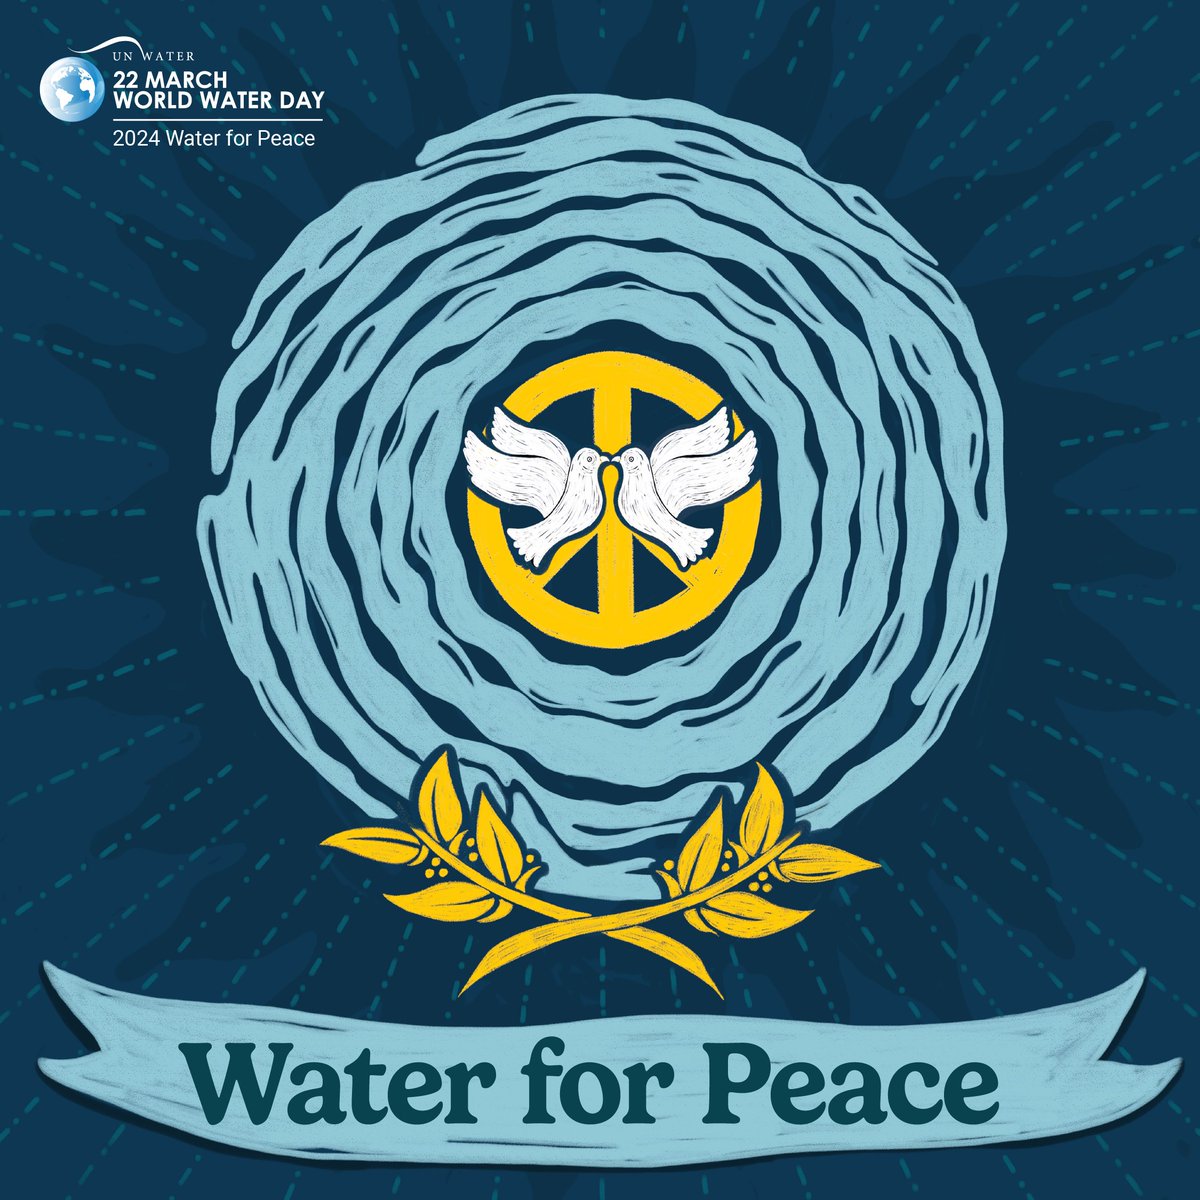 March 22 is #WorldWaterDay, themed 'Water for Peace'. #Water can create peace or spark conflict. As a #humanright, we must balance everyone’s water needs. This #WorldWaterDay, let’s unite & use water to build a more peaceful future. Read more here: worldwaterday.org